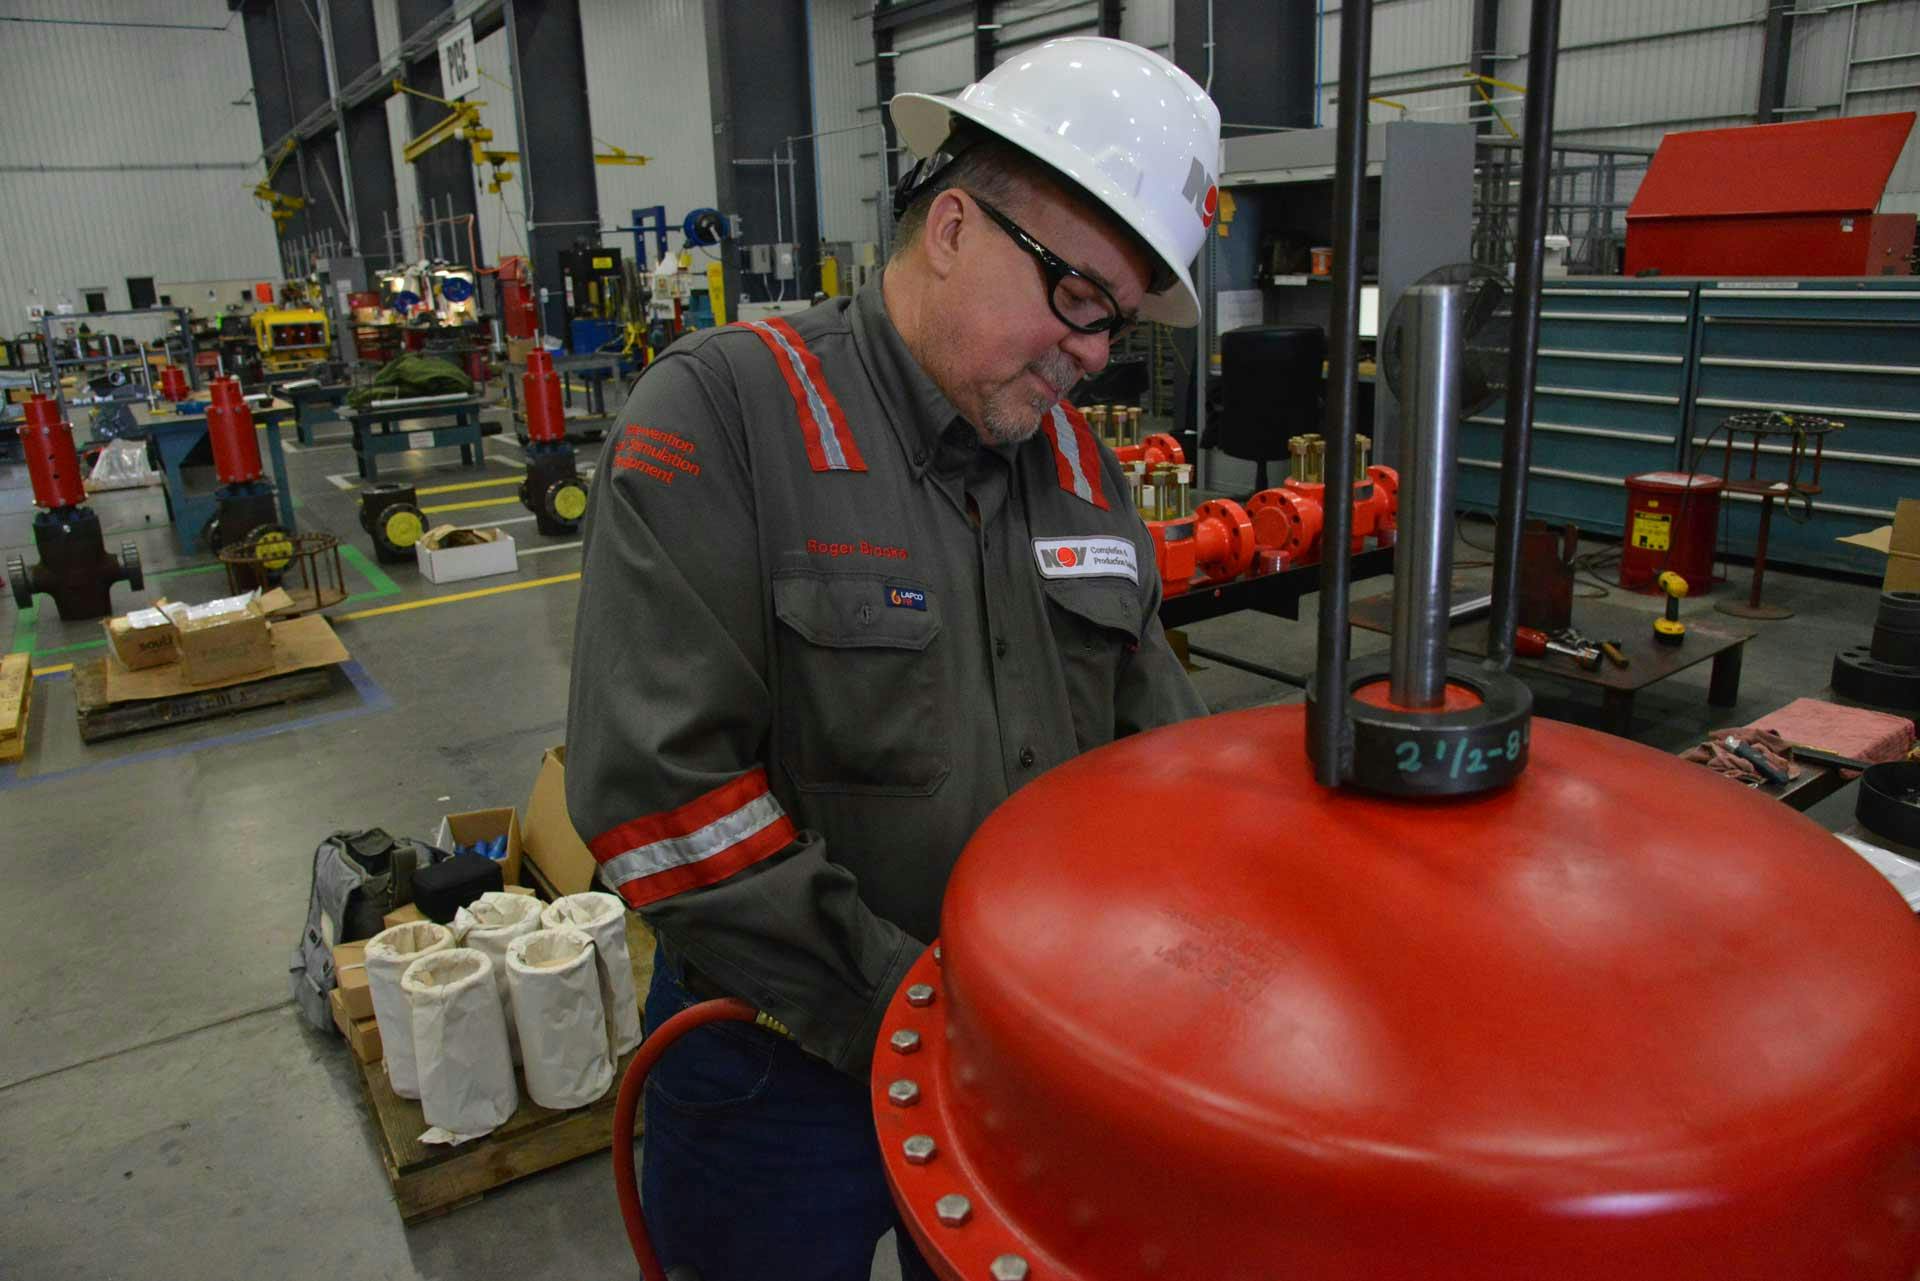 A technician works on Pneumatic Shutdown Valve in a manufacturing facility